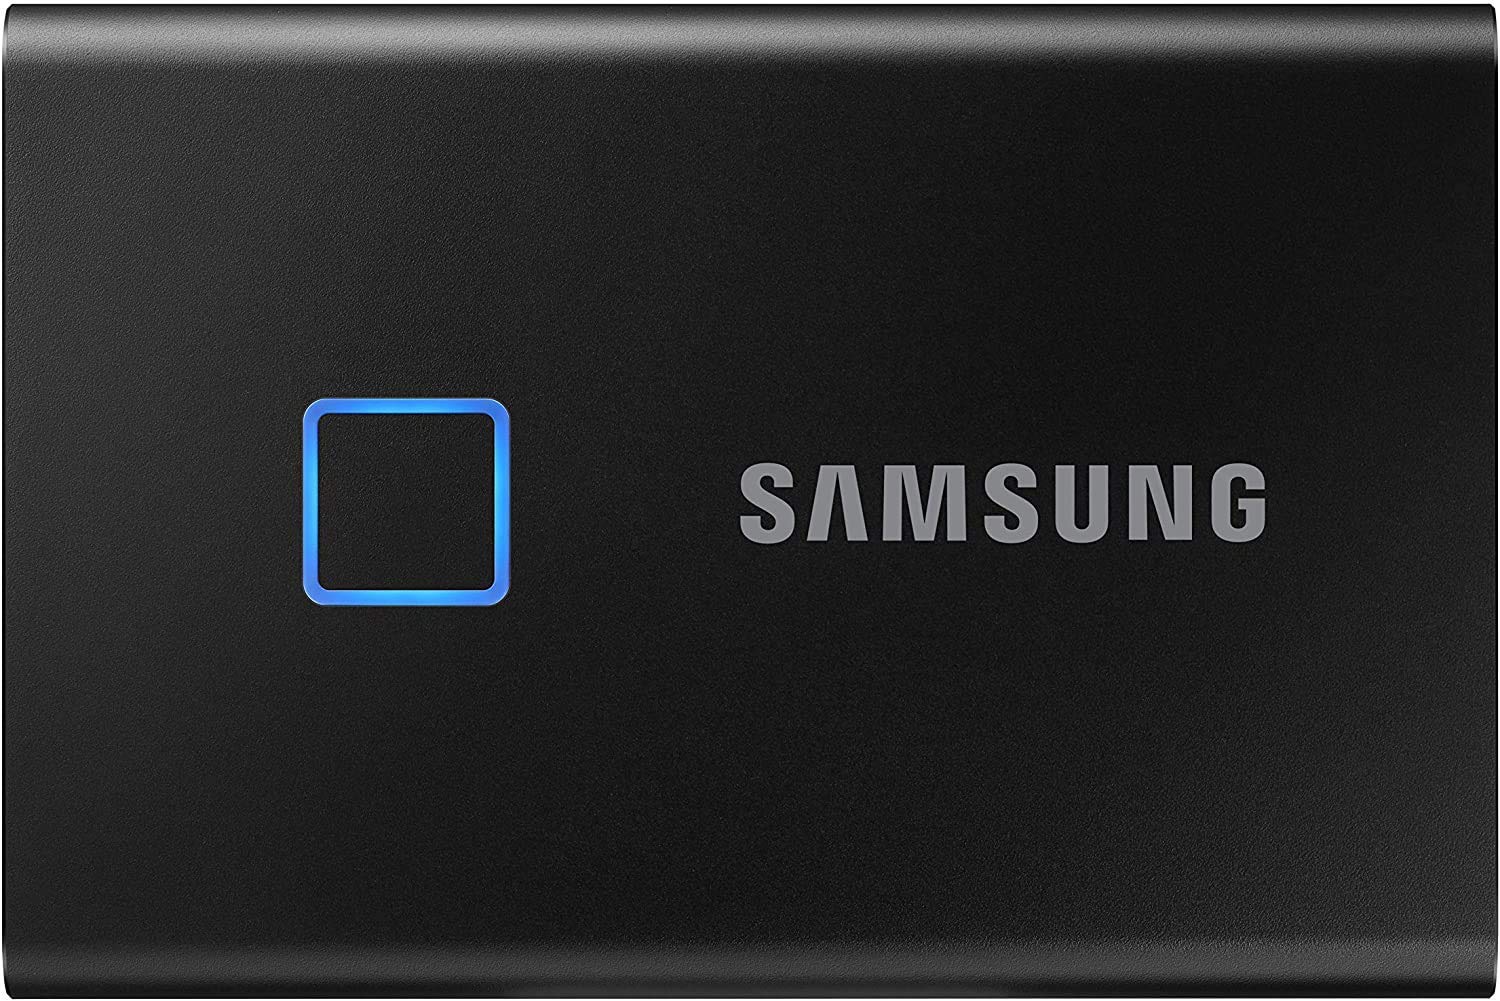 1TB Samsung SSD T7 Portable External Solid State Drive $79.99 + Free Shipping